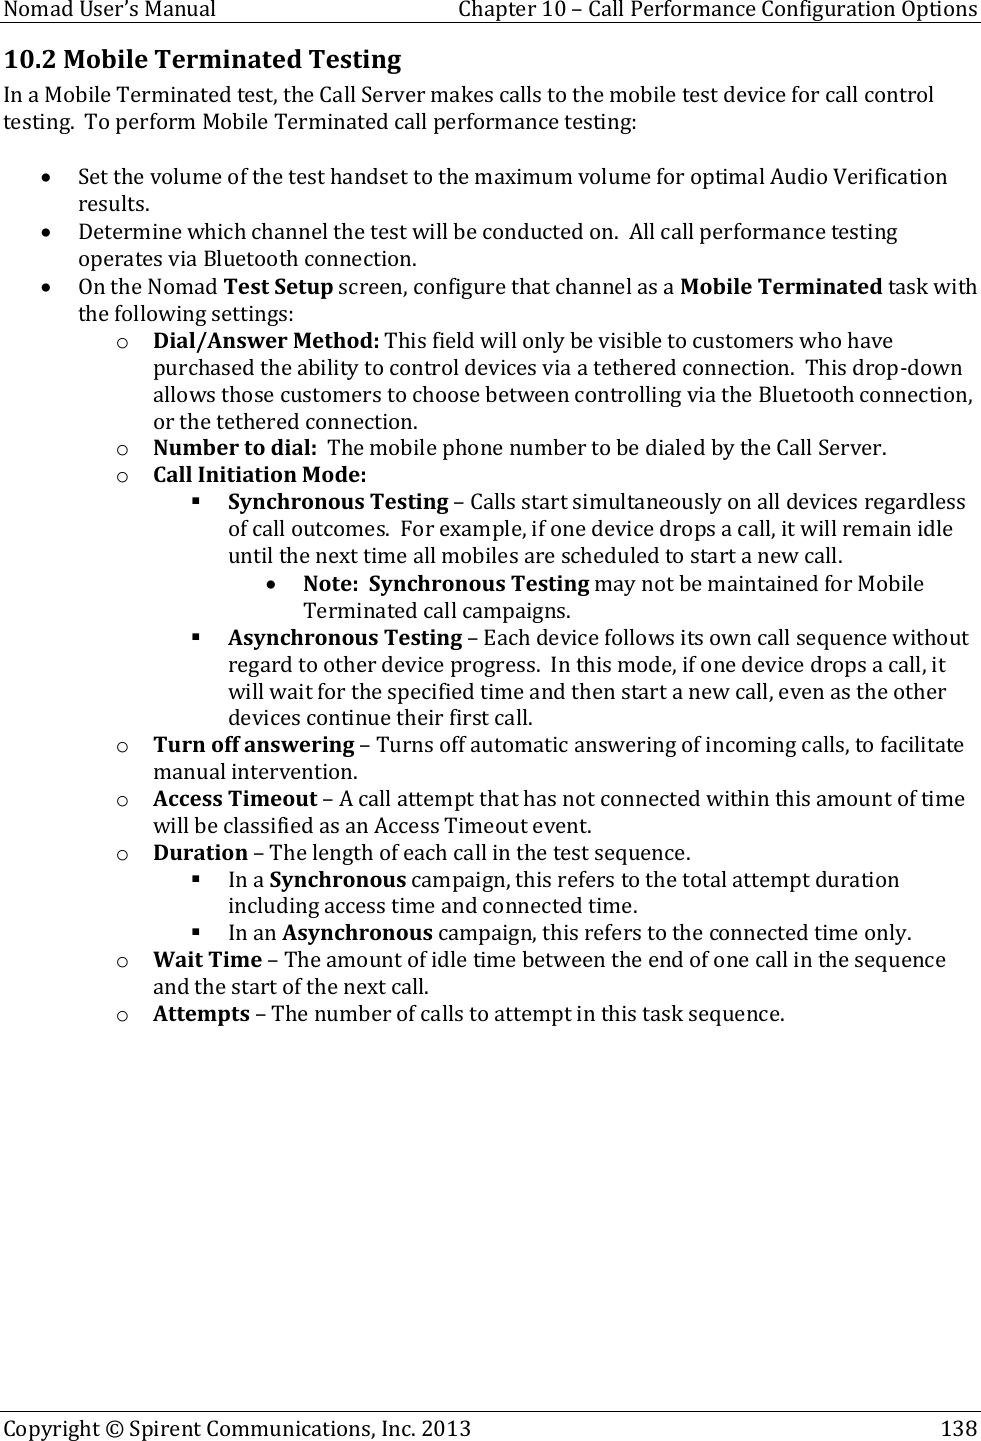  Nomad User’s Manual  Chapter 10 – Call Performance Configuration Options Copyright © Spirent Communications, Inc. 2013    138  10.2 Mobile Terminated Testing In a Mobile Terminated test, the Call Server makes calls to the mobile test device for call control testing.  To perform Mobile Terminated call performance testing:   Set the volume of the test handset to the maximum volume for optimal Audio Verification results.  Determine which channel the test will be conducted on.  All call performance testing operates via Bluetooth connection.  On the Nomad Test Setup screen, configure that channel as a Mobile Terminated task with the following settings: o Dial/Answer Method: This field will only be visible to customers who have purchased the ability to control devices via a tethered connection.  This drop-down allows those customers to choose between controlling via the Bluetooth connection, or the tethered connection. o Number to dial:  The mobile phone number to be dialed by the Call Server. o Call Initiation Mode:    Synchronous Testing – Calls start simultaneously on all devices regardless of call outcomes.  For example, if one device drops a call, it will remain idle until the next time all mobiles are scheduled to start a new call.    Note:  Synchronous Testing may not be maintained for Mobile Terminated call campaigns.  Asynchronous Testing – Each device follows its own call sequence without regard to other device progress.  In this mode, if one device drops a call, it will wait for the specified time and then start a new call, even as the other devices continue their first call. o Turn off answering – Turns off automatic answering of incoming calls, to facilitate manual intervention. o Access Timeout – A call attempt that has not connected within this amount of time will be classified as an Access Timeout event. o Duration – The length of each call in the test sequence.  In a Synchronous campaign, this refers to the total attempt duration including access time and connected time.  In an Asynchronous campaign, this refers to the connected time only. o Wait Time – The amount of idle time between the end of one call in the sequence and the start of the next call. o Attempts – The number of calls to attempt in this task sequence.  